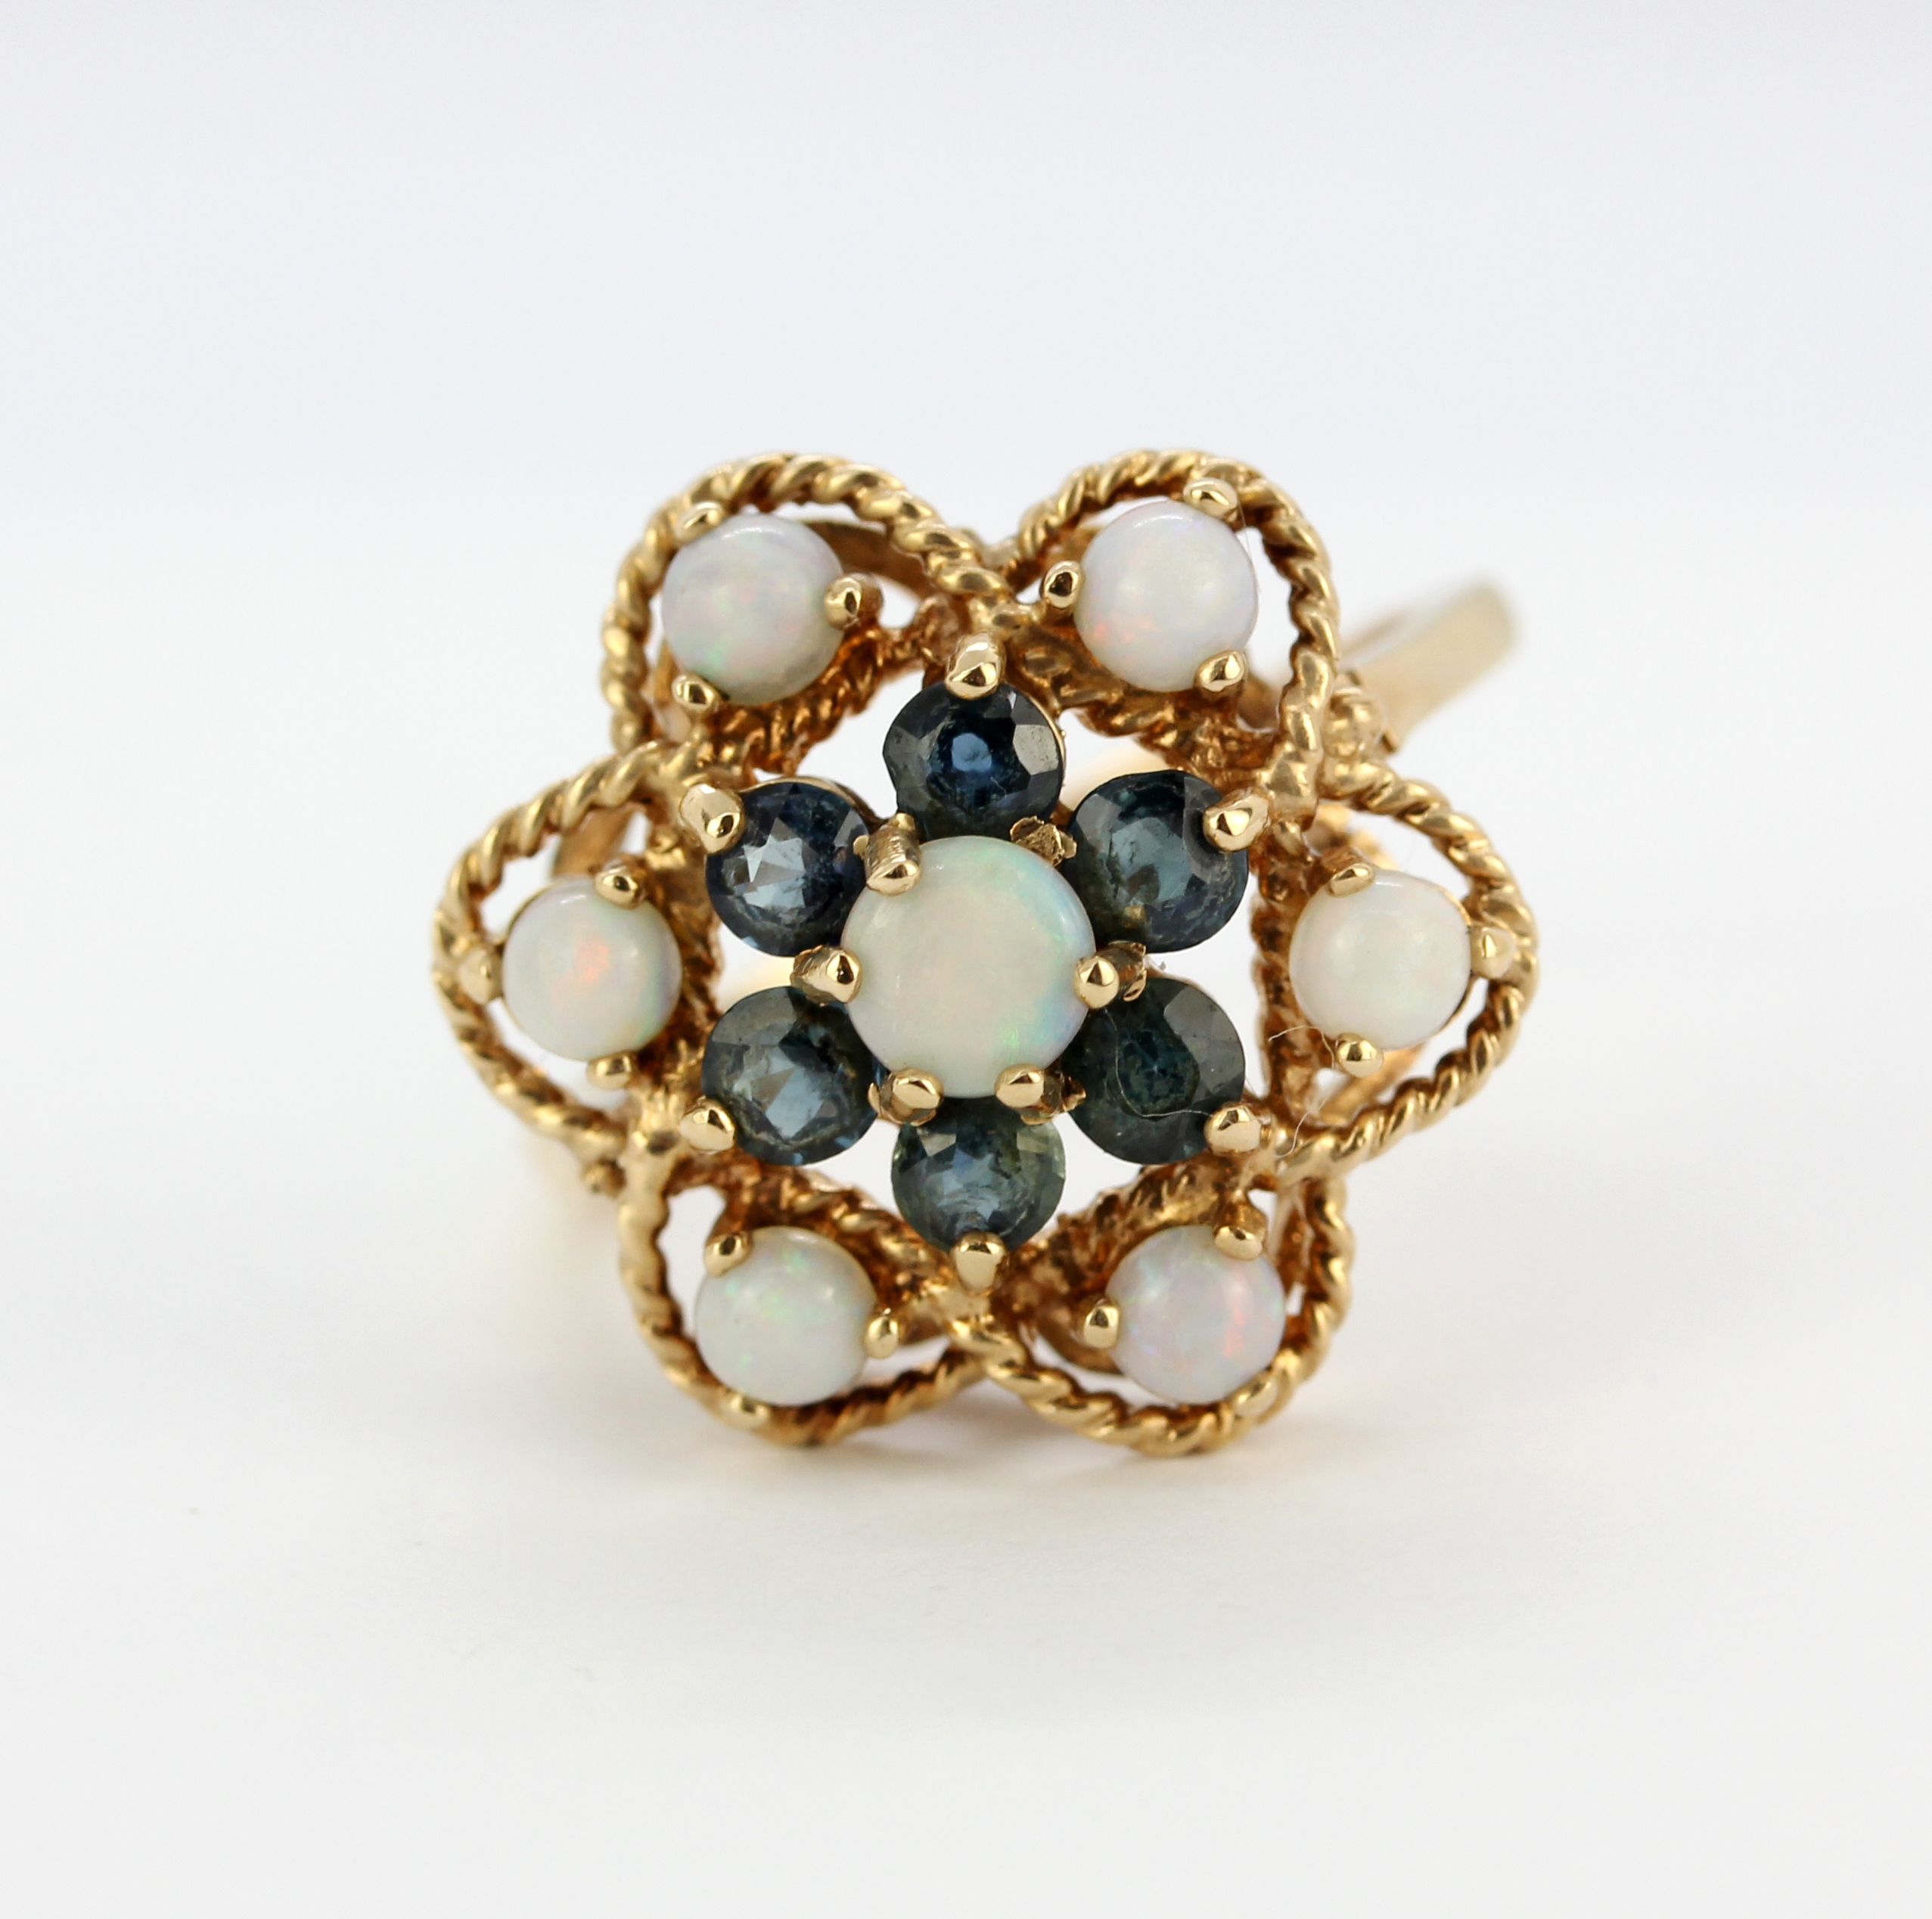 A large hallmarked (worn hallmark) 9ct yellow gold ring set with round cabochon cut opals and - Image 4 of 4